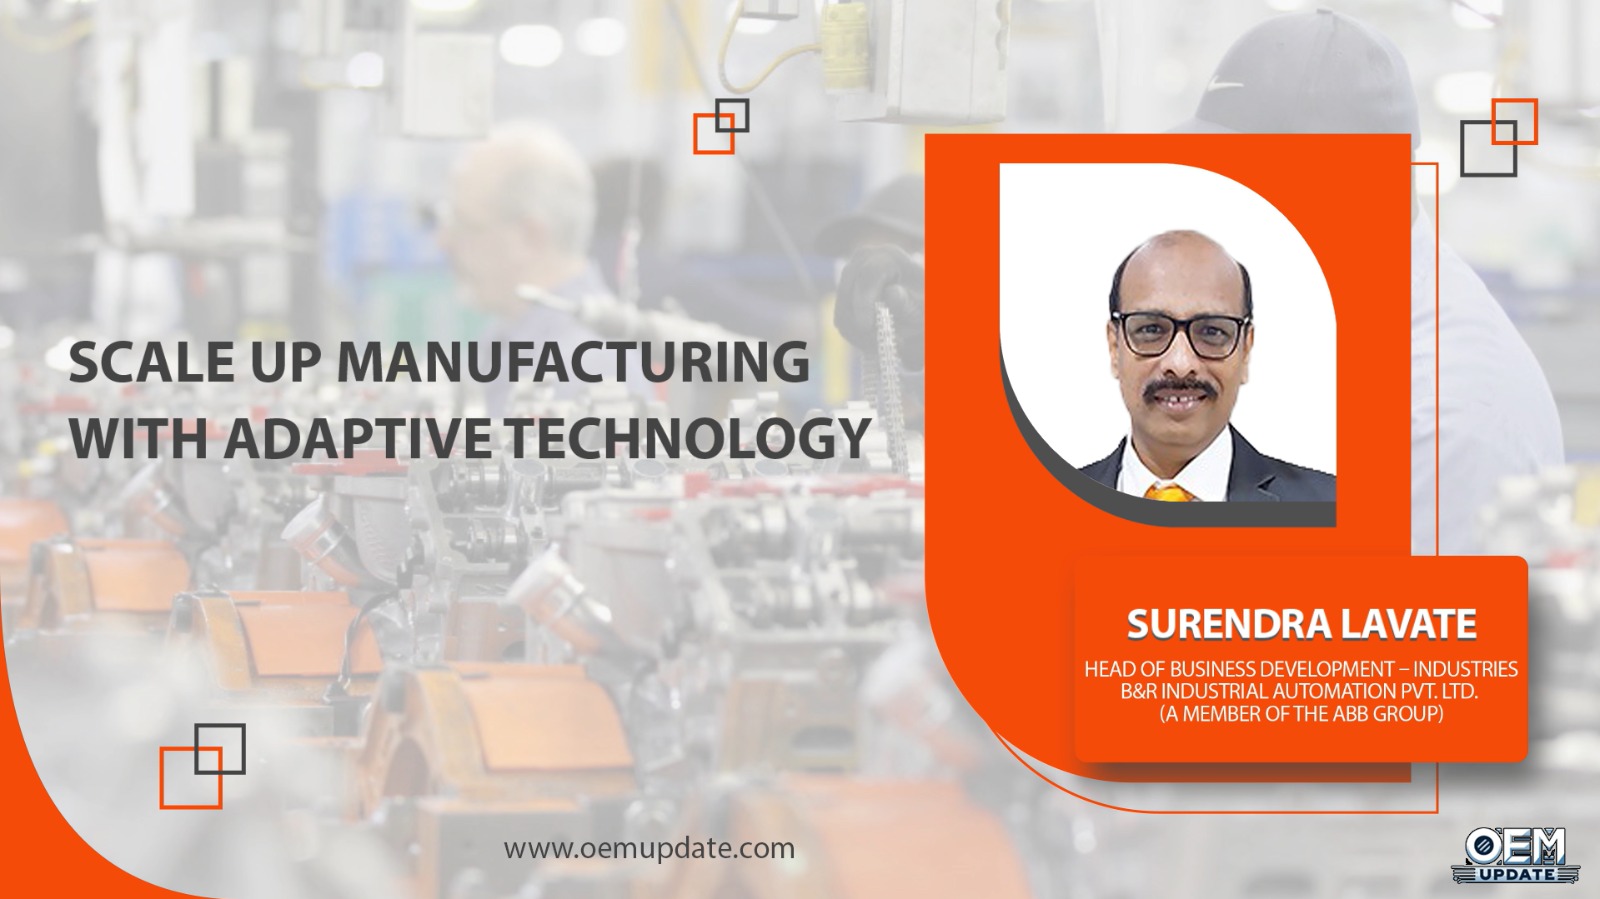 Scale up manufacturing with adaptive technology | OEM Update Magazine